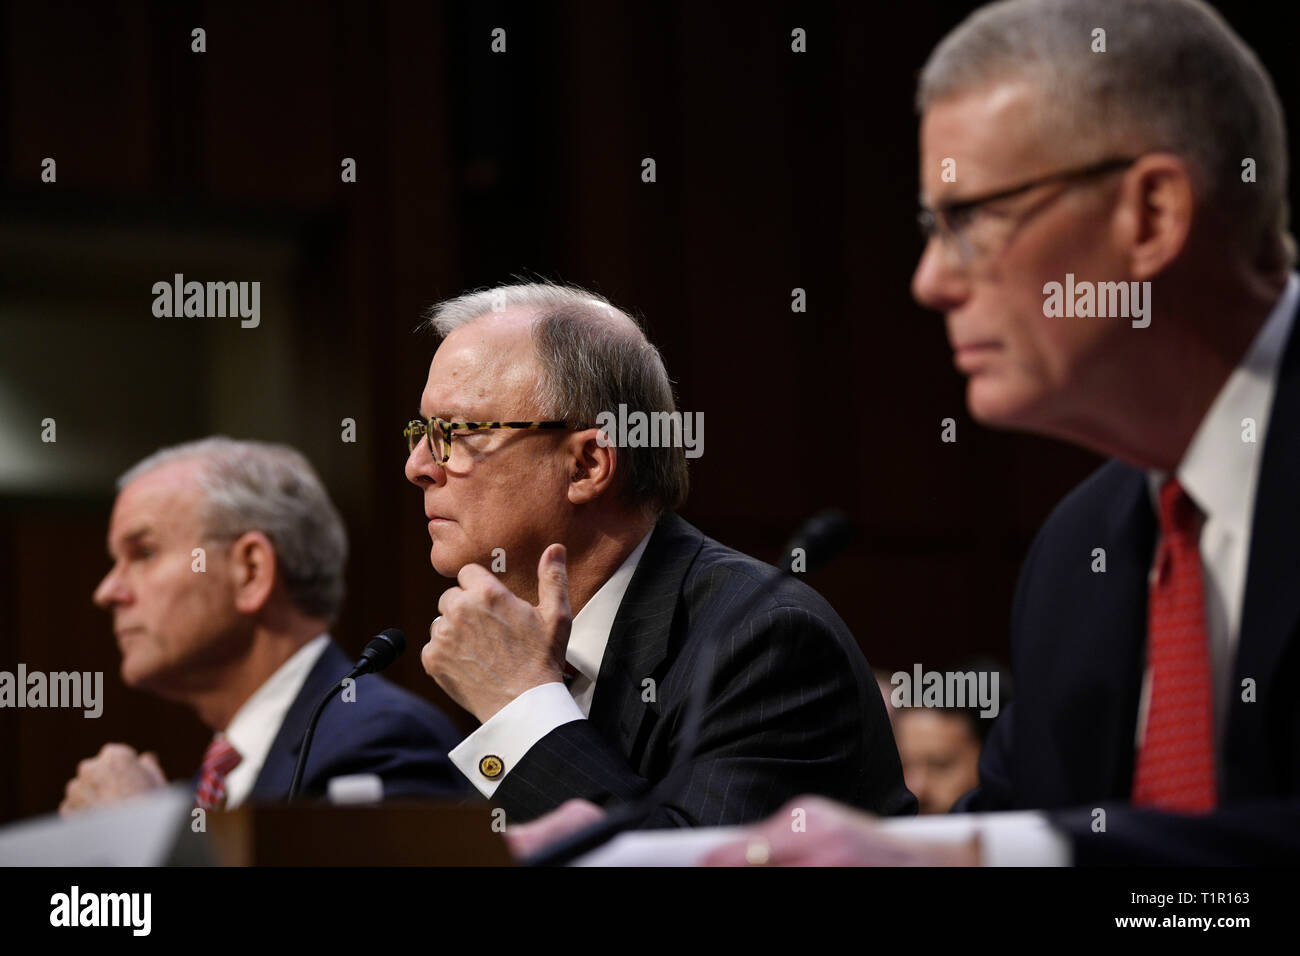 (190327) -- WASHINGTON, March 27, 2019 (Xinhua) -- Daniel Elwell (L), acting administrator of the U.S. Federal Aviation Administration (FAA), Robert Sumwalt (C), Chairman of the U.S. National Transportation Safety Board (NTSB), and Calvin Scovel, the U.S. Transportation Department's inspector general, attend a Senate Commerce Committee hearing on airline safety in Washington, DC, the United States, on March 27, 2019. The U.S. Federal Aviation Administration (FAA) on Wednesday vowed to revamp its air safety oversight after two deadly crashes involving Boeing 737 Max jets in less than five mont Stock Photo